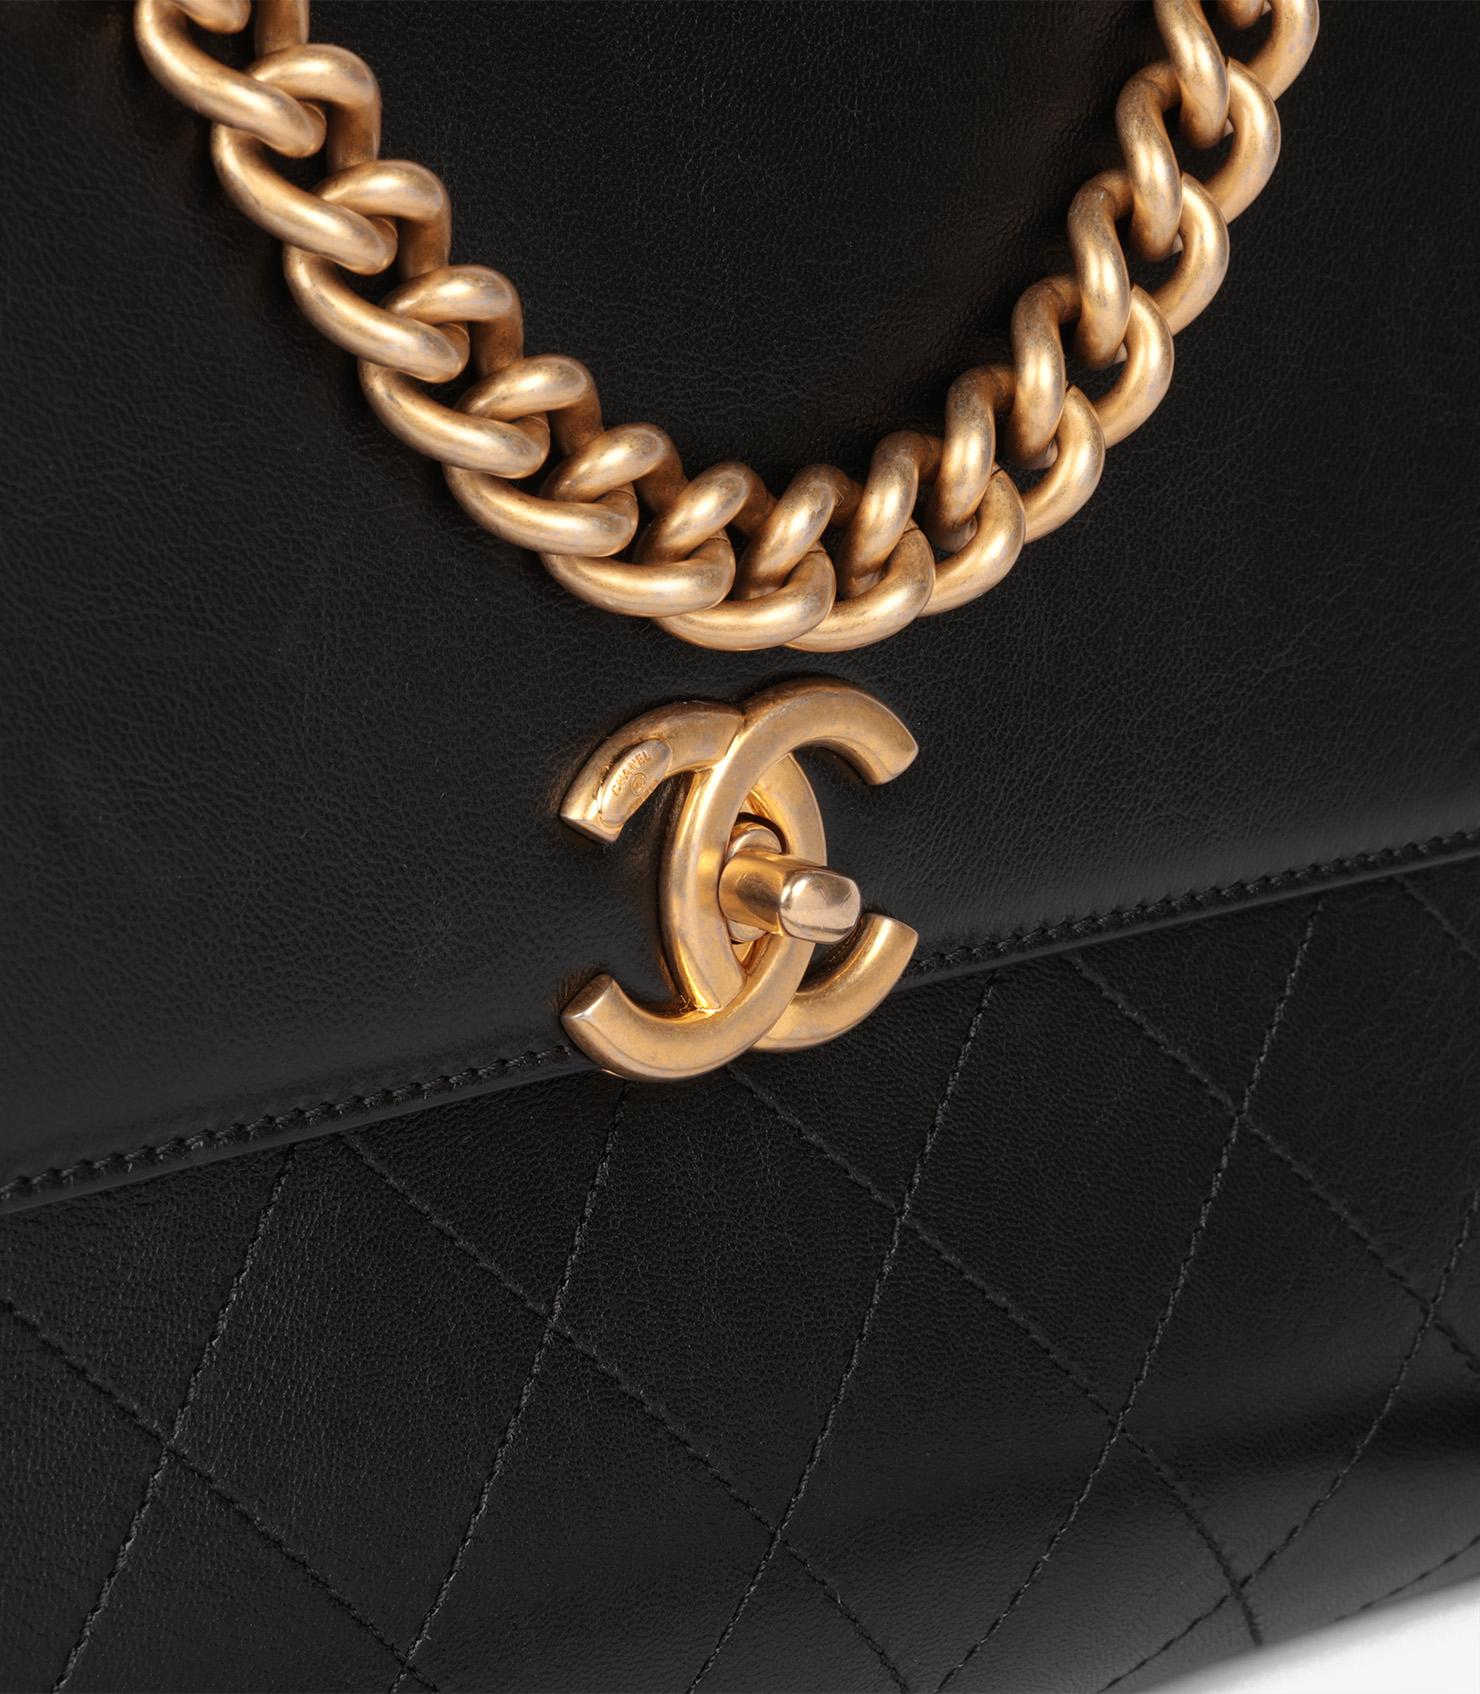 Chanel Black Quilted Calfskin Leather Medium Coco Luxe Top Handle Flap Bag 4